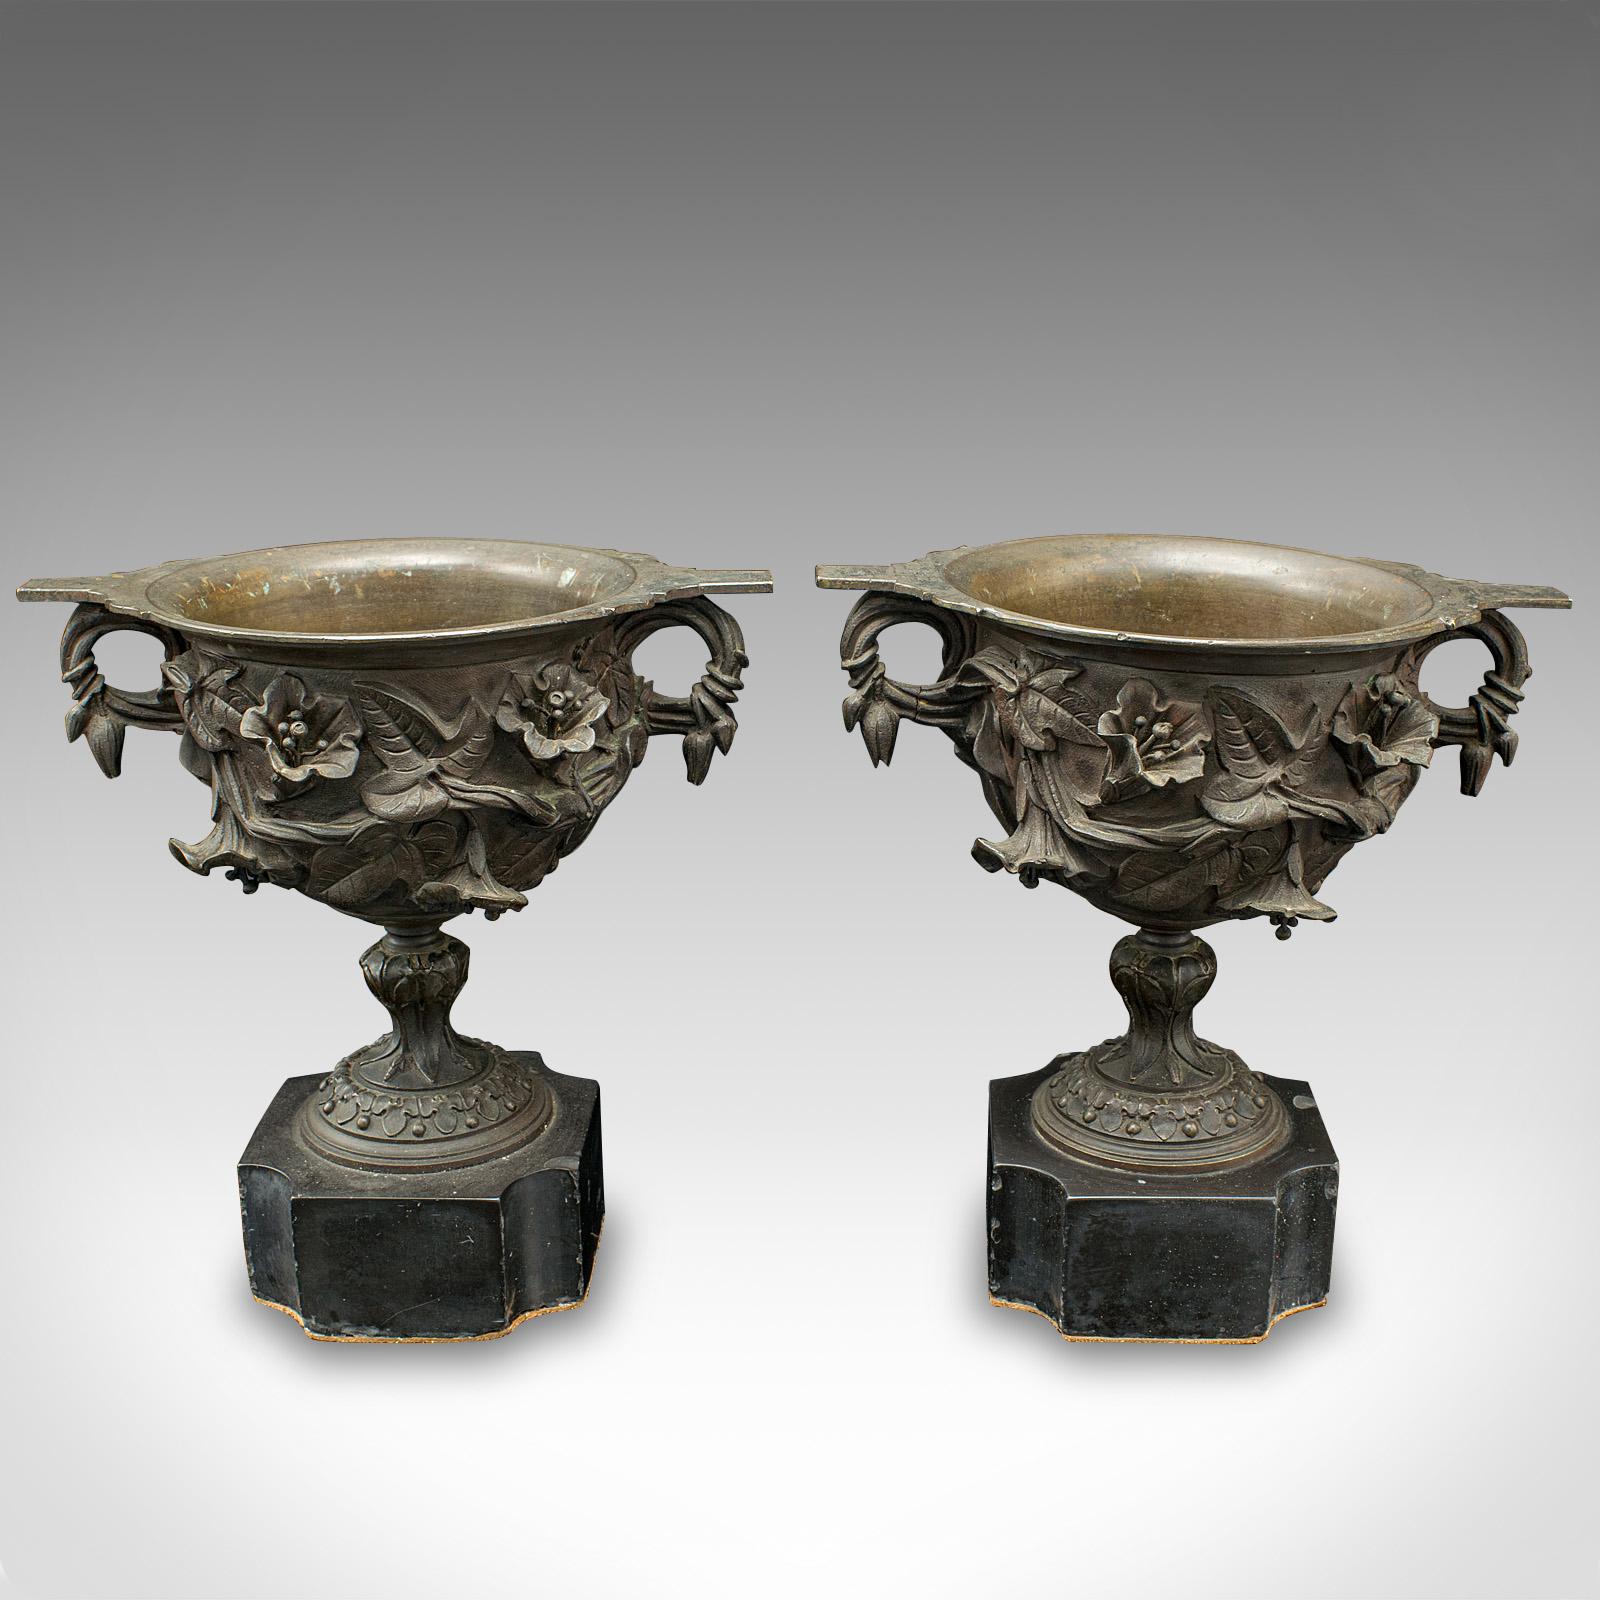 This is a pair of antique Drinking cups. An Italian, bronze over marble decorative goblet in Grand Tour taste, dating to the early Victorian period, circa 1850.

Strikingly presented cups, with superb relief decor
Displays a desirable aged patina